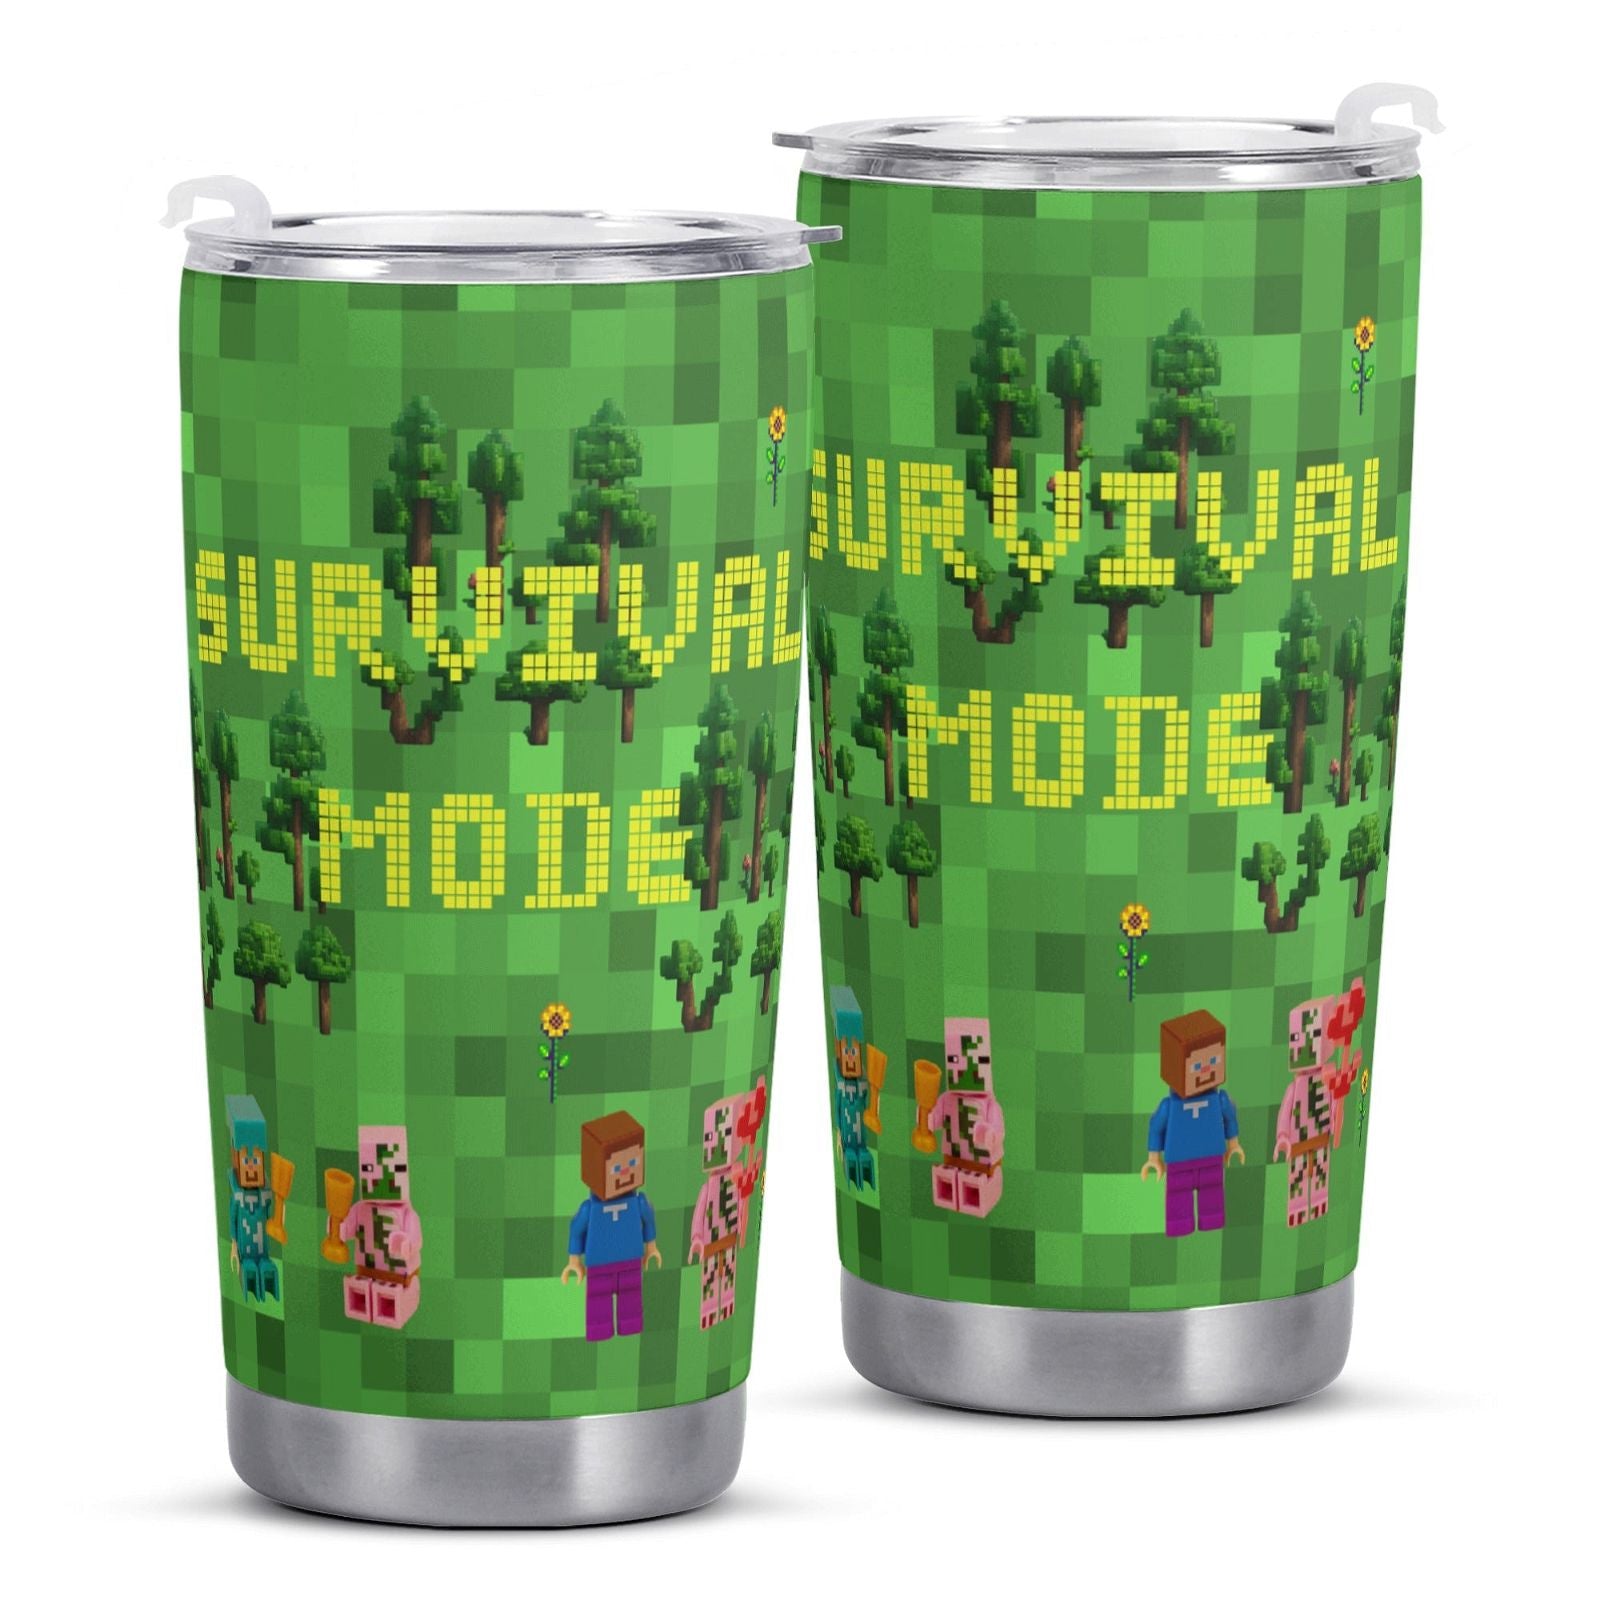 Survival Car Cup All Over Print Design - Perfect for On-the-Go Adventures - Iron Phoenix GHG